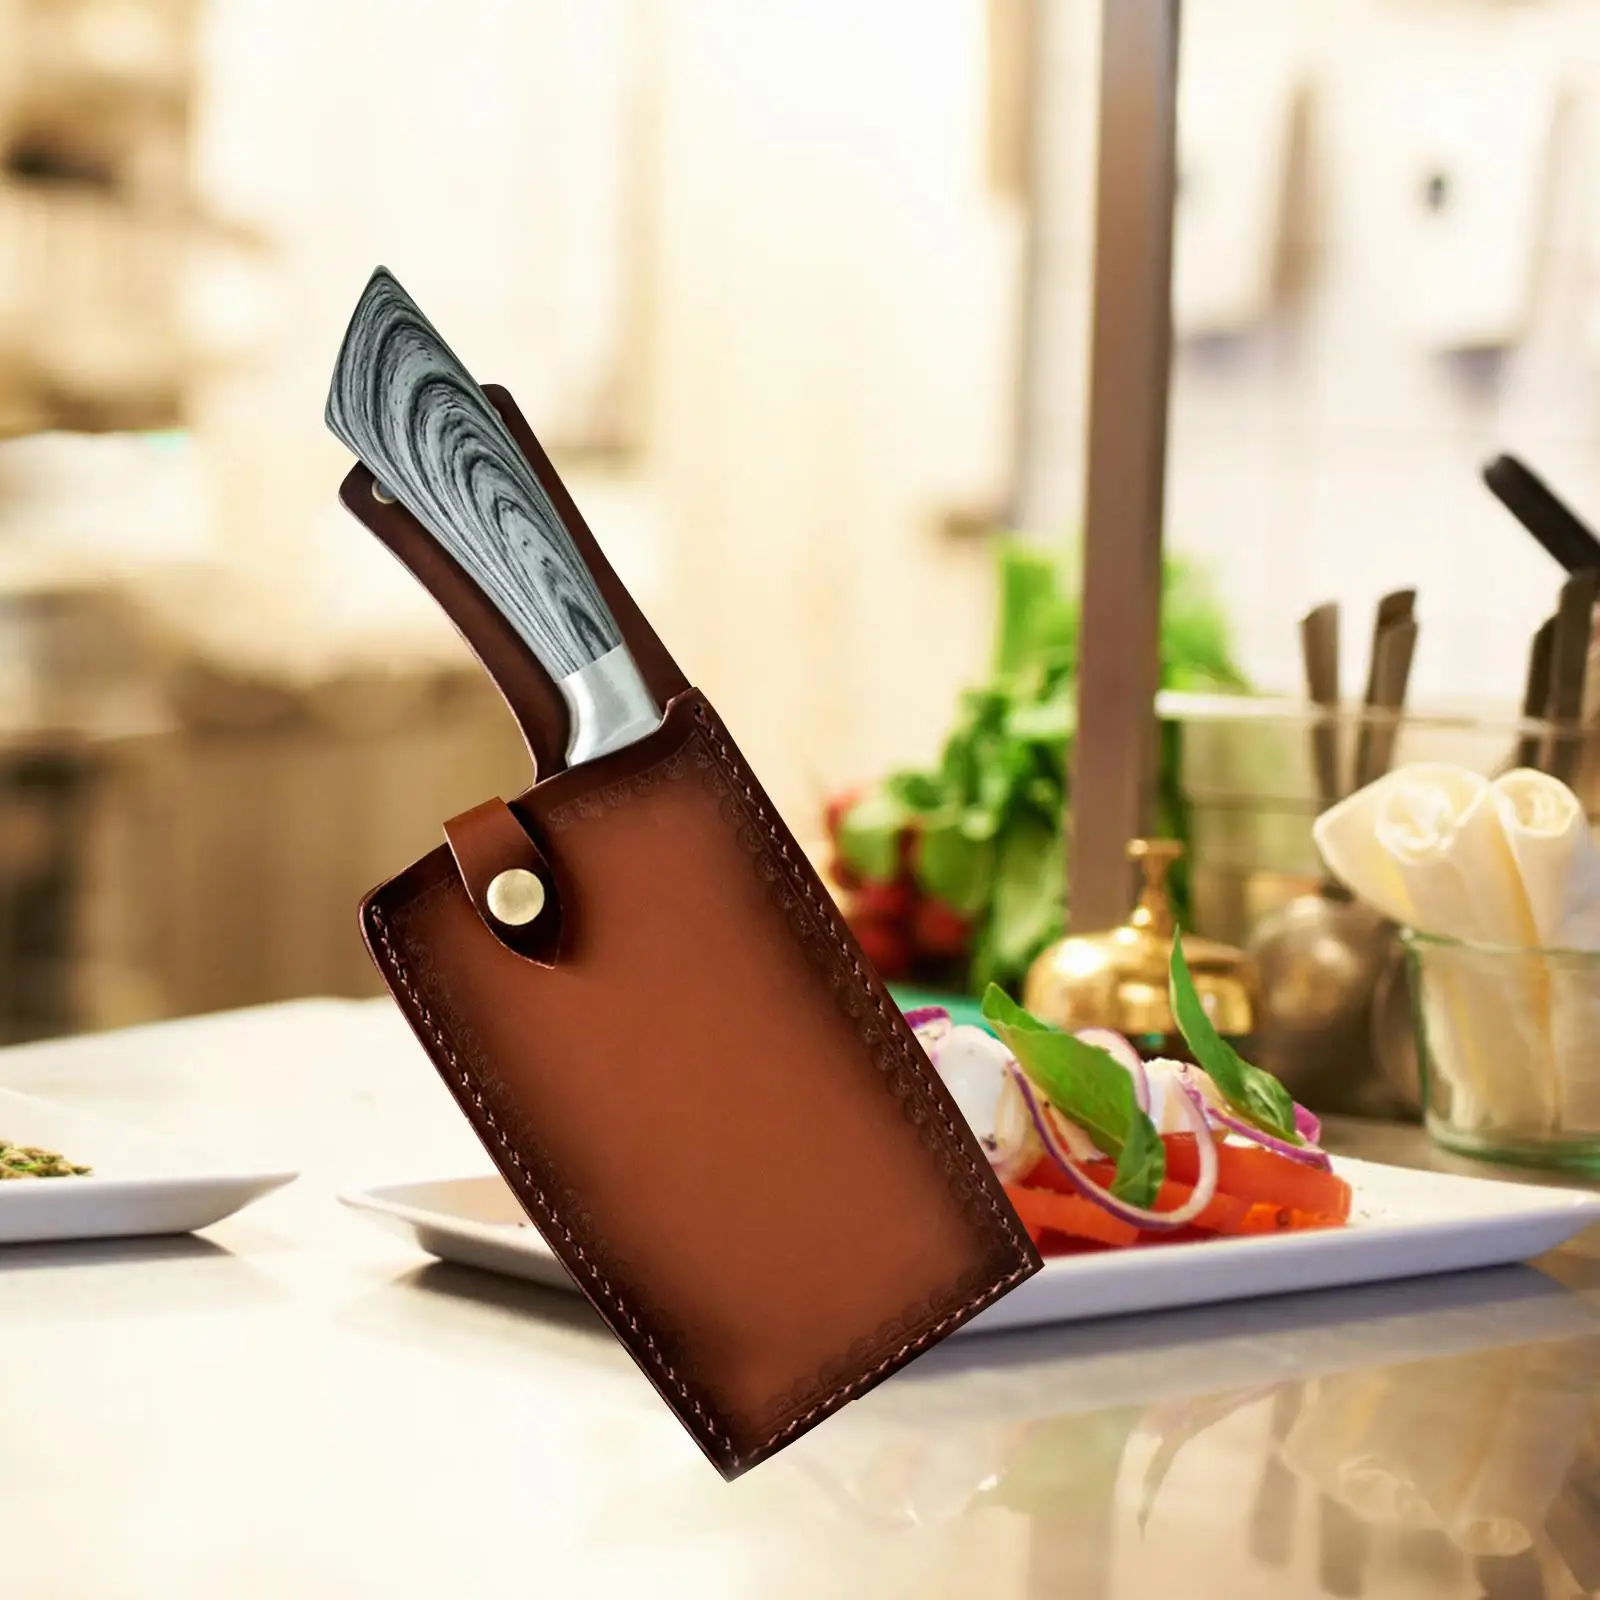 Cutter Sheath Protector, Cleaver Sheath, Durable Universal PU Leather Reusable Knife Sleeve, Cutter Protective Cover